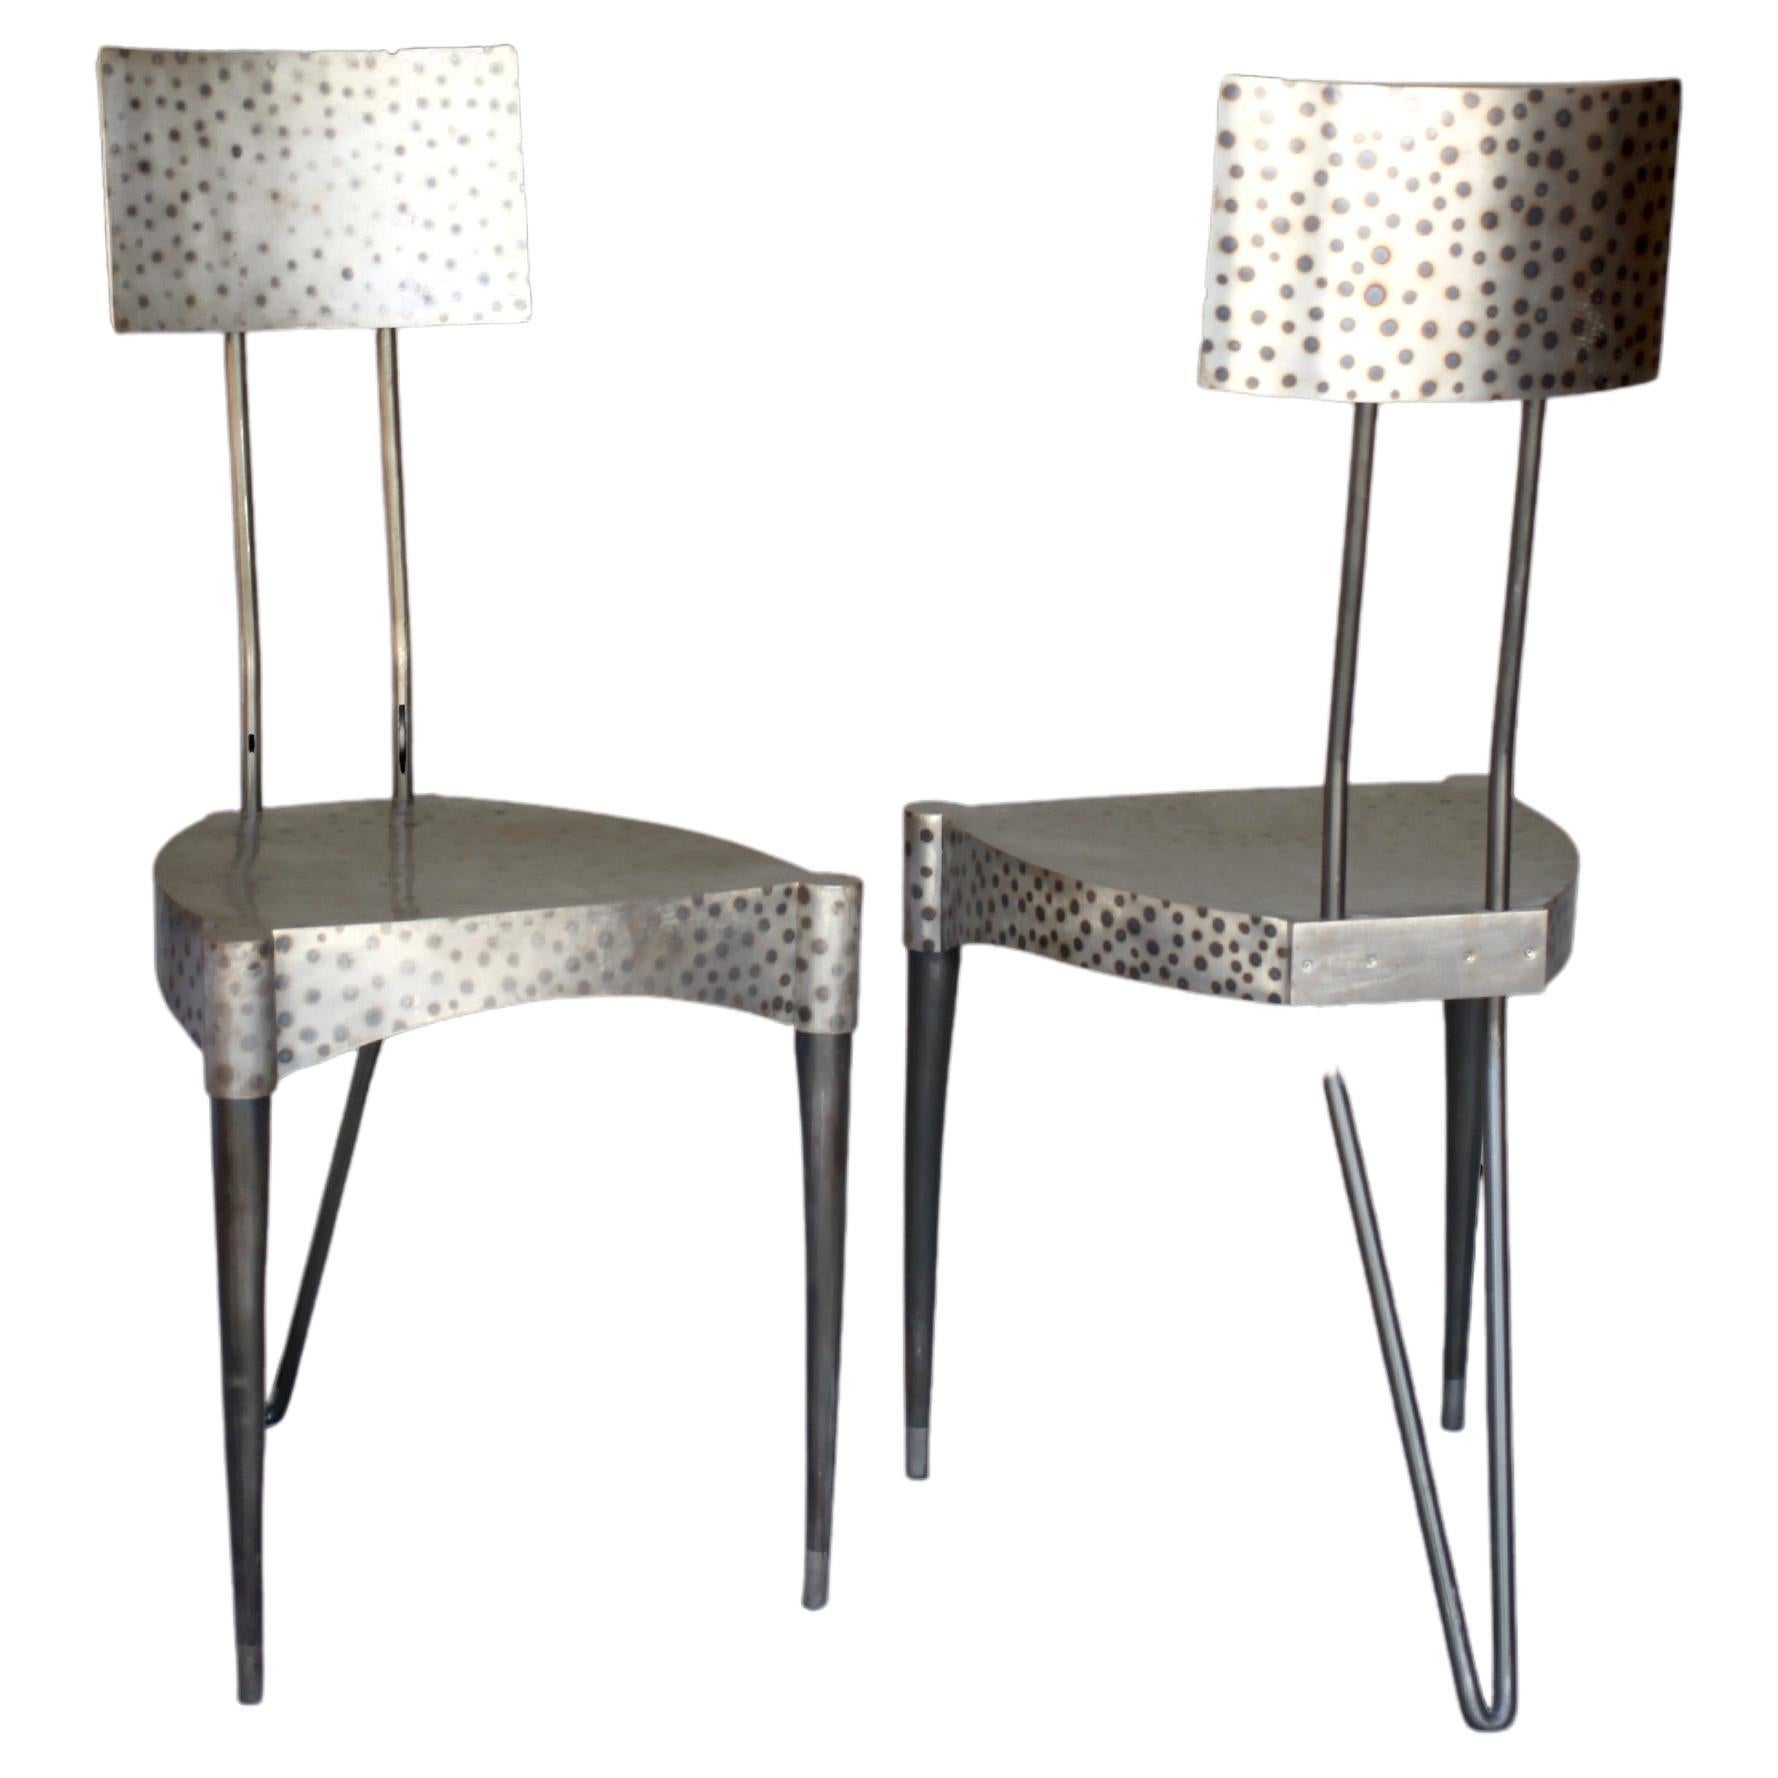 Pair Of Andre Dubreuil Grousset Hammered Steel Chairs